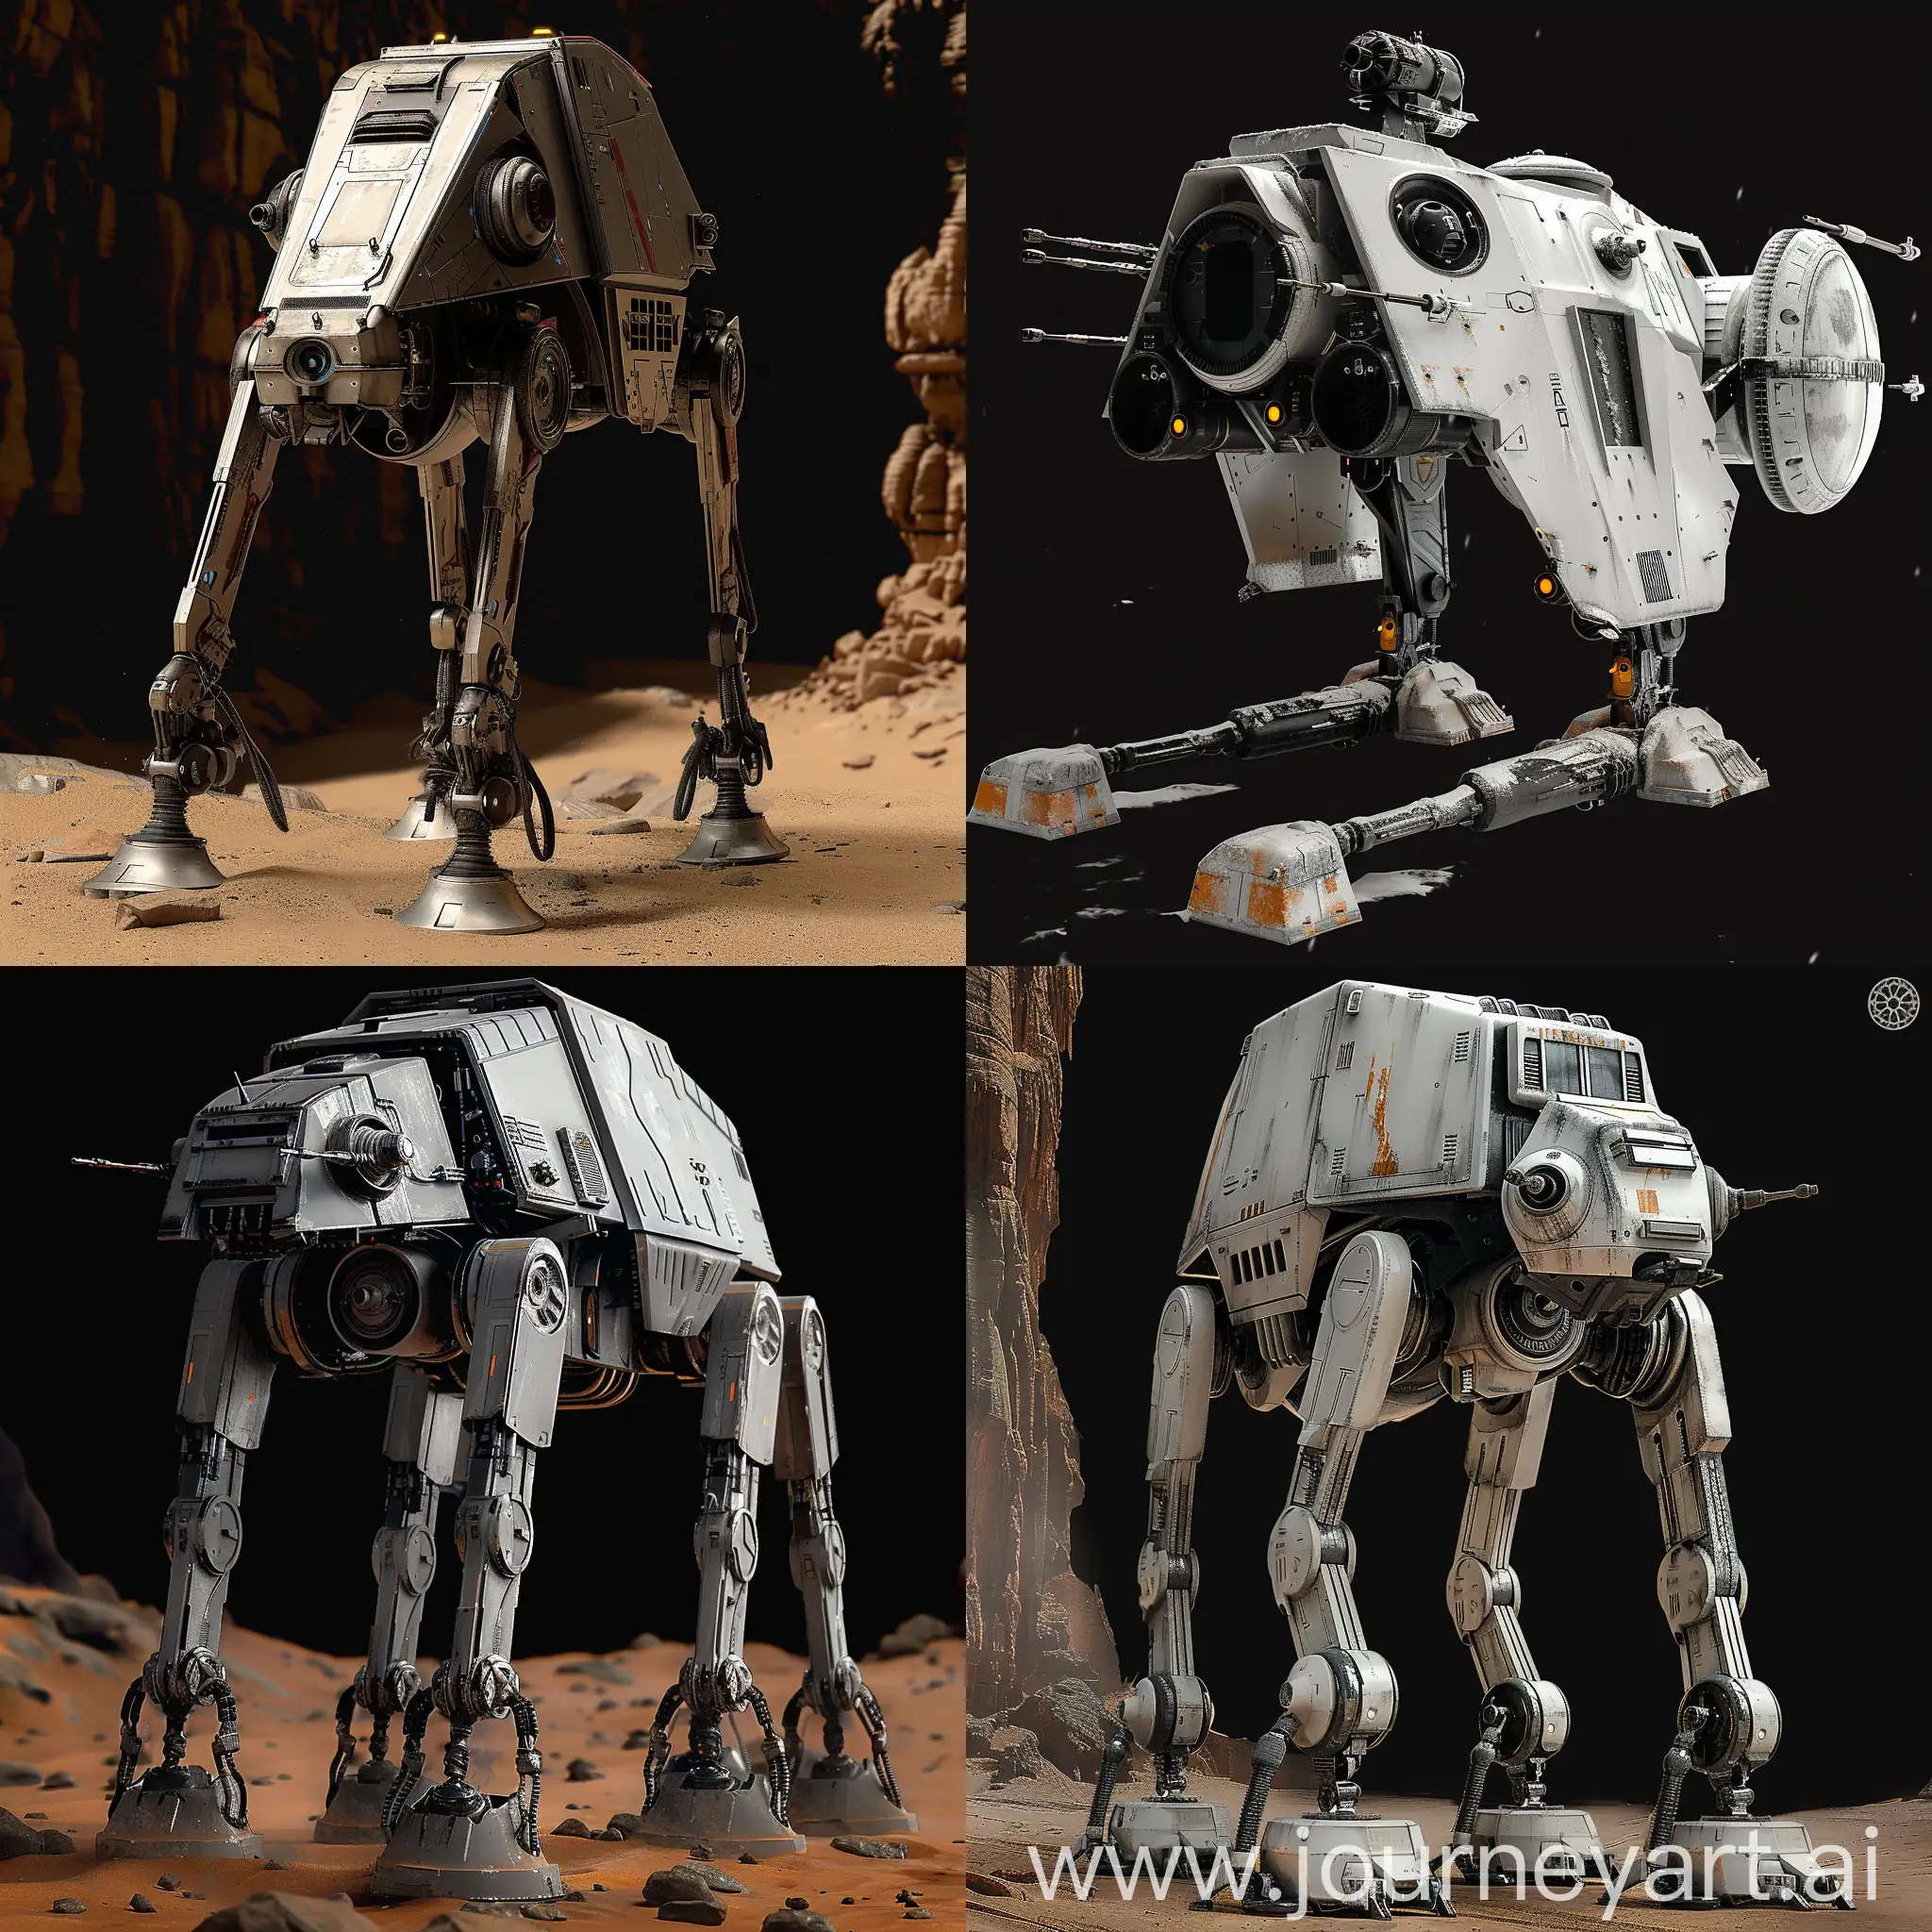 Futuristic Star Wars All Terrain Scout Transport https://static.wikia.nocookie.net/starwars/images/f/ff/ATST-SWBdice.png/revision/latest?cb=20230723050455, Advanced Materials, Autonomous Operation, Energy-Efficient Propulsion, Adaptive Suspension, Stealth Technology, Modular Design, Integrated Weapons Systems, Biometric Security, Enhanced Communication Systems, Self-Repairing Systems, Sleek and Aerodynamic Shape, Panoramic Viewports, Articulated Legs, Dynamic Lighting, Customizable Exterior, Integrated Storage, User-Friendly Controls, Futuristic Color Scheme, Integrated Climate Control, Aesthetically Pleasing Design, octane render --stylize 1000